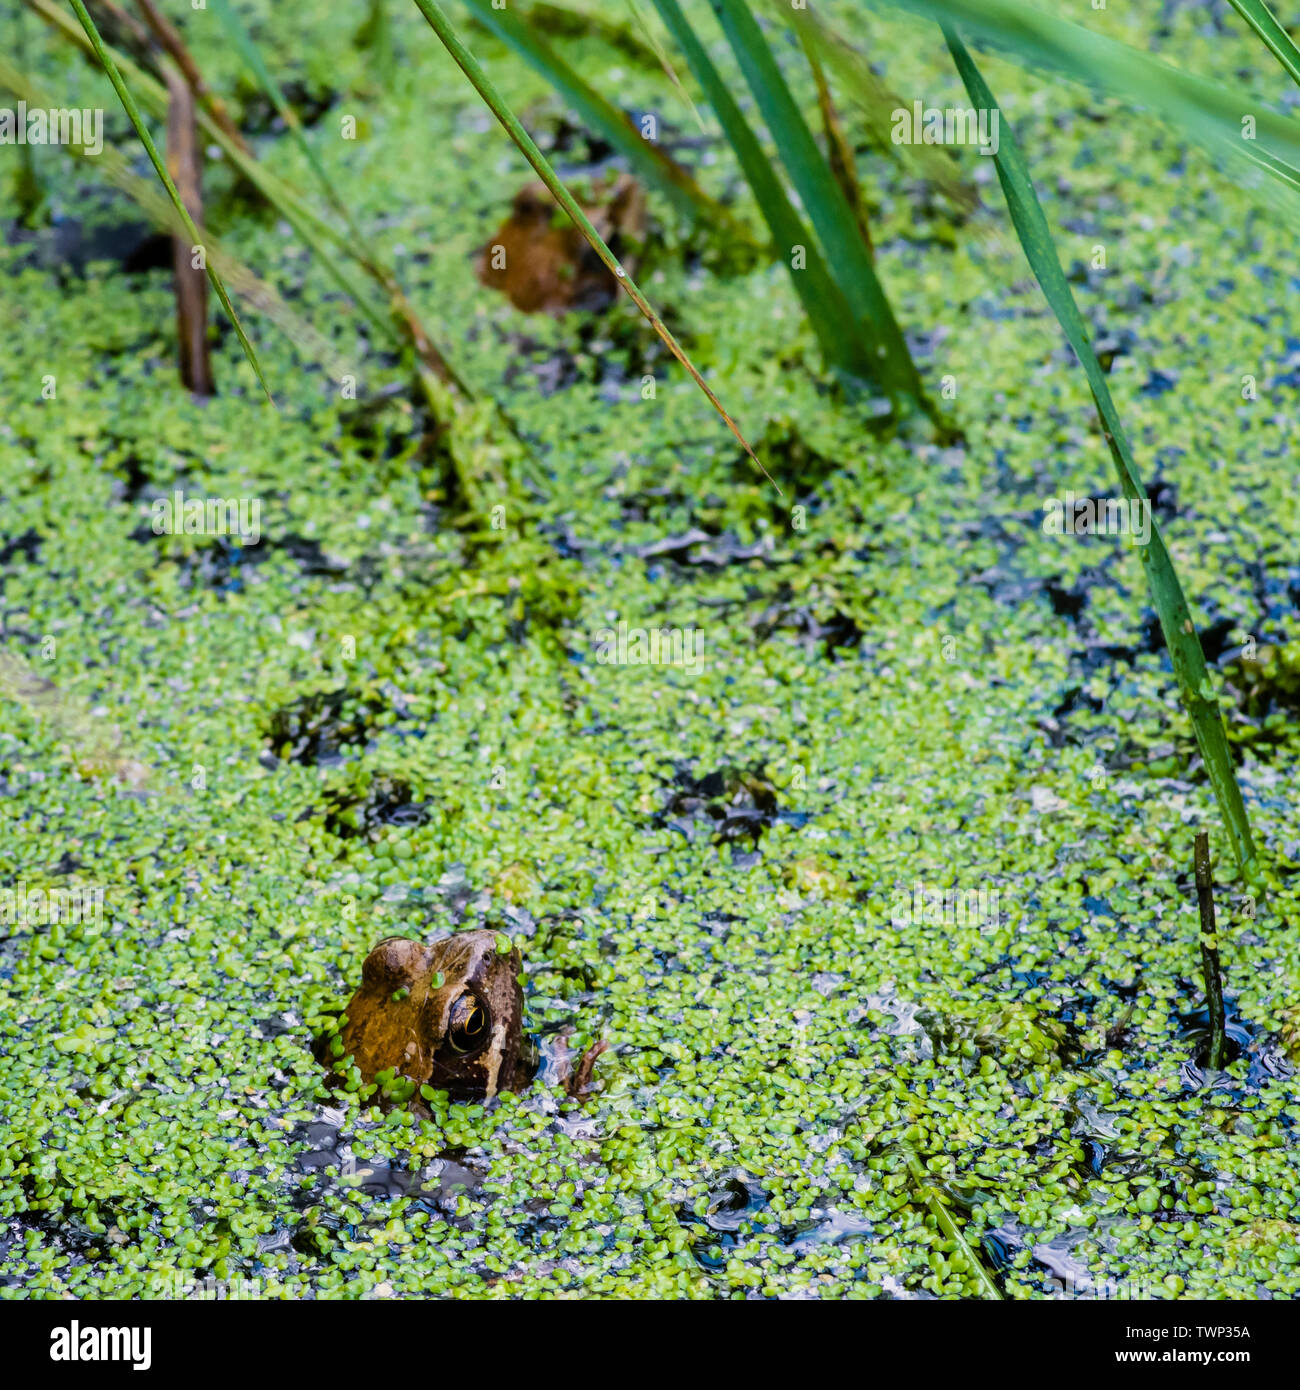 European common frogs (Rana temporaria) in a pond covered with duckweed. Stock Photo